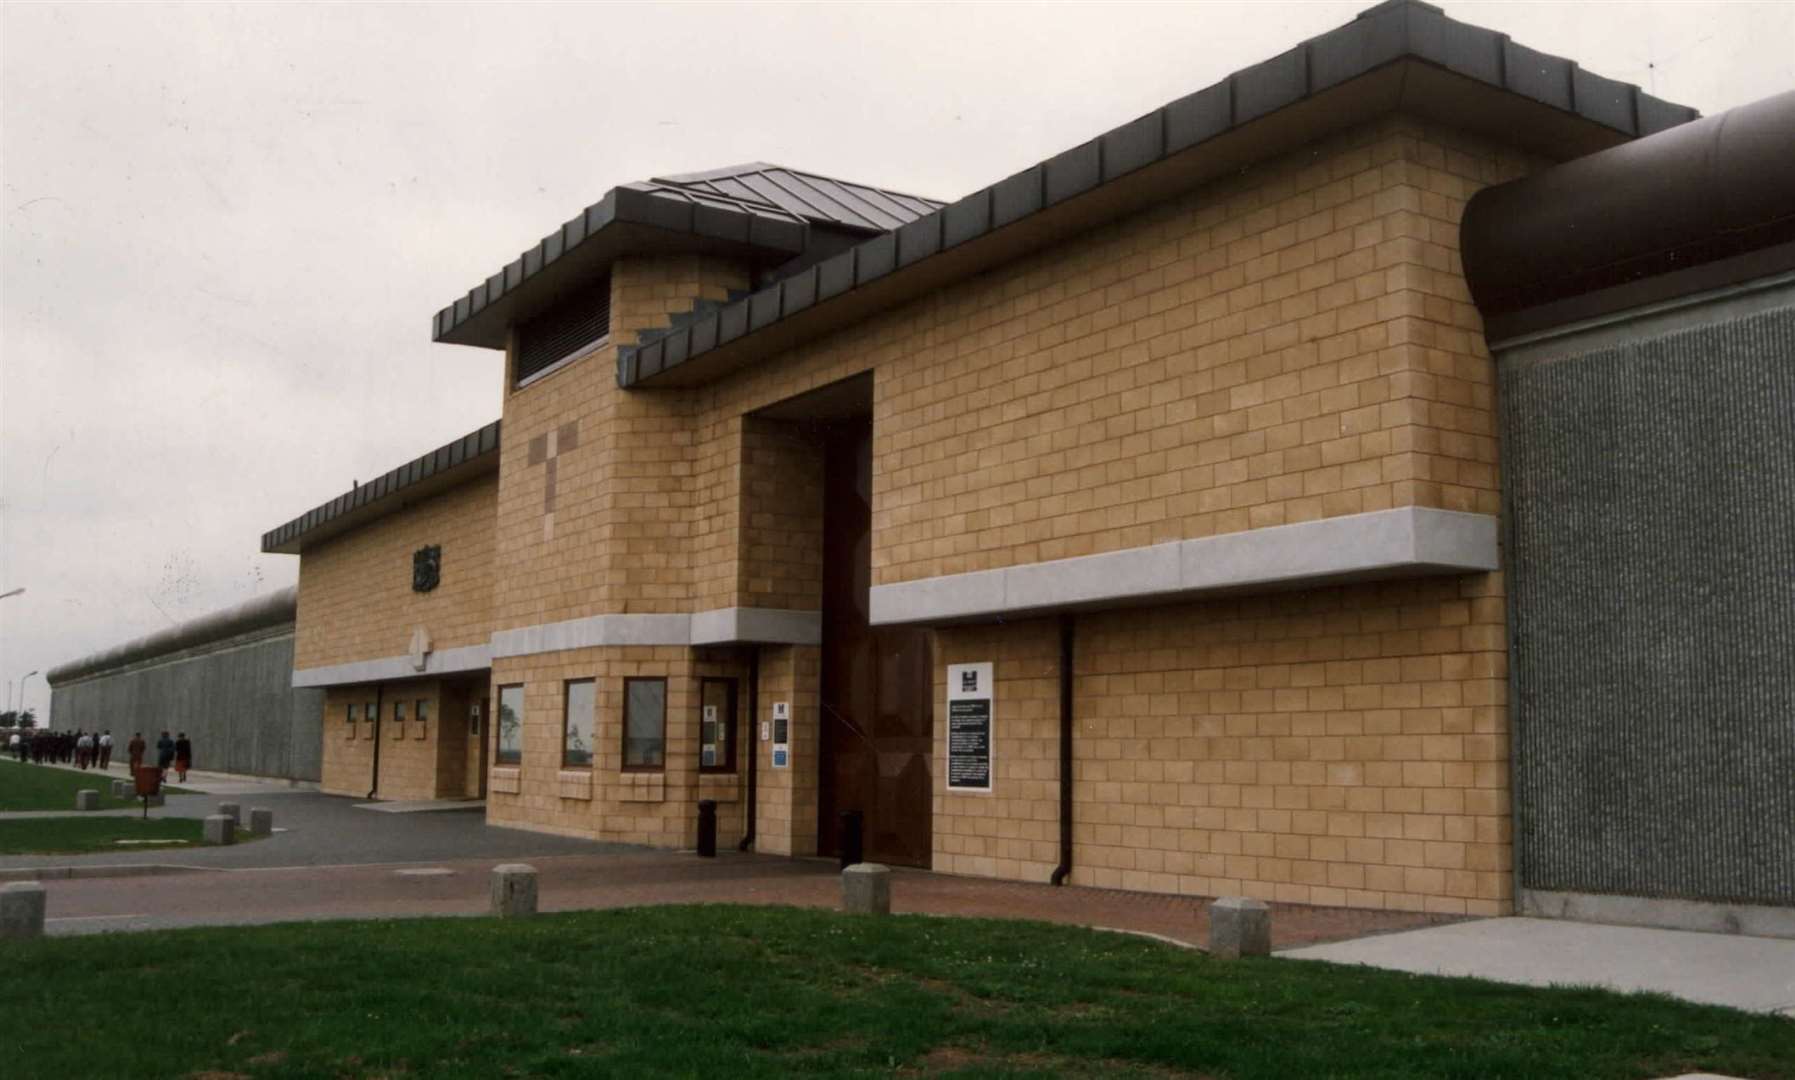 HMP Elmley in Eastchurch on the Isle of Sheppey